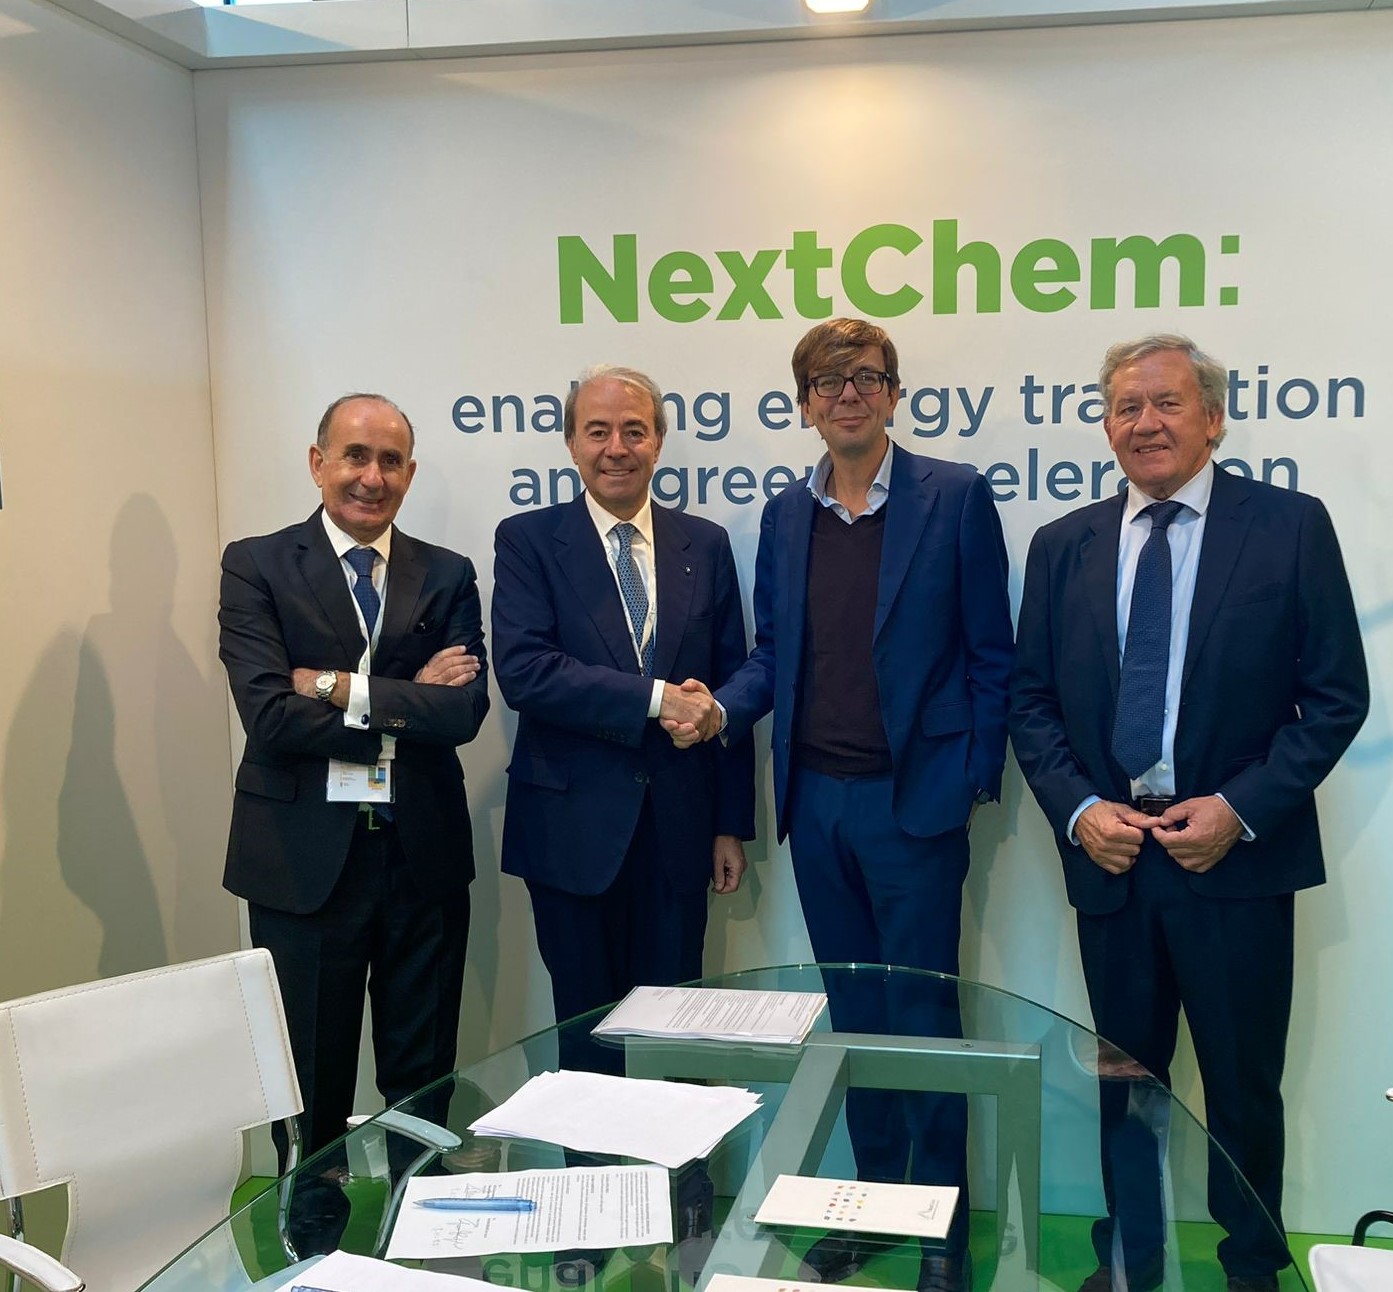 NextChem and SUEZ sign an agreement to develop their collaboration on Waste-to-Chemicals technology and projects in Italy